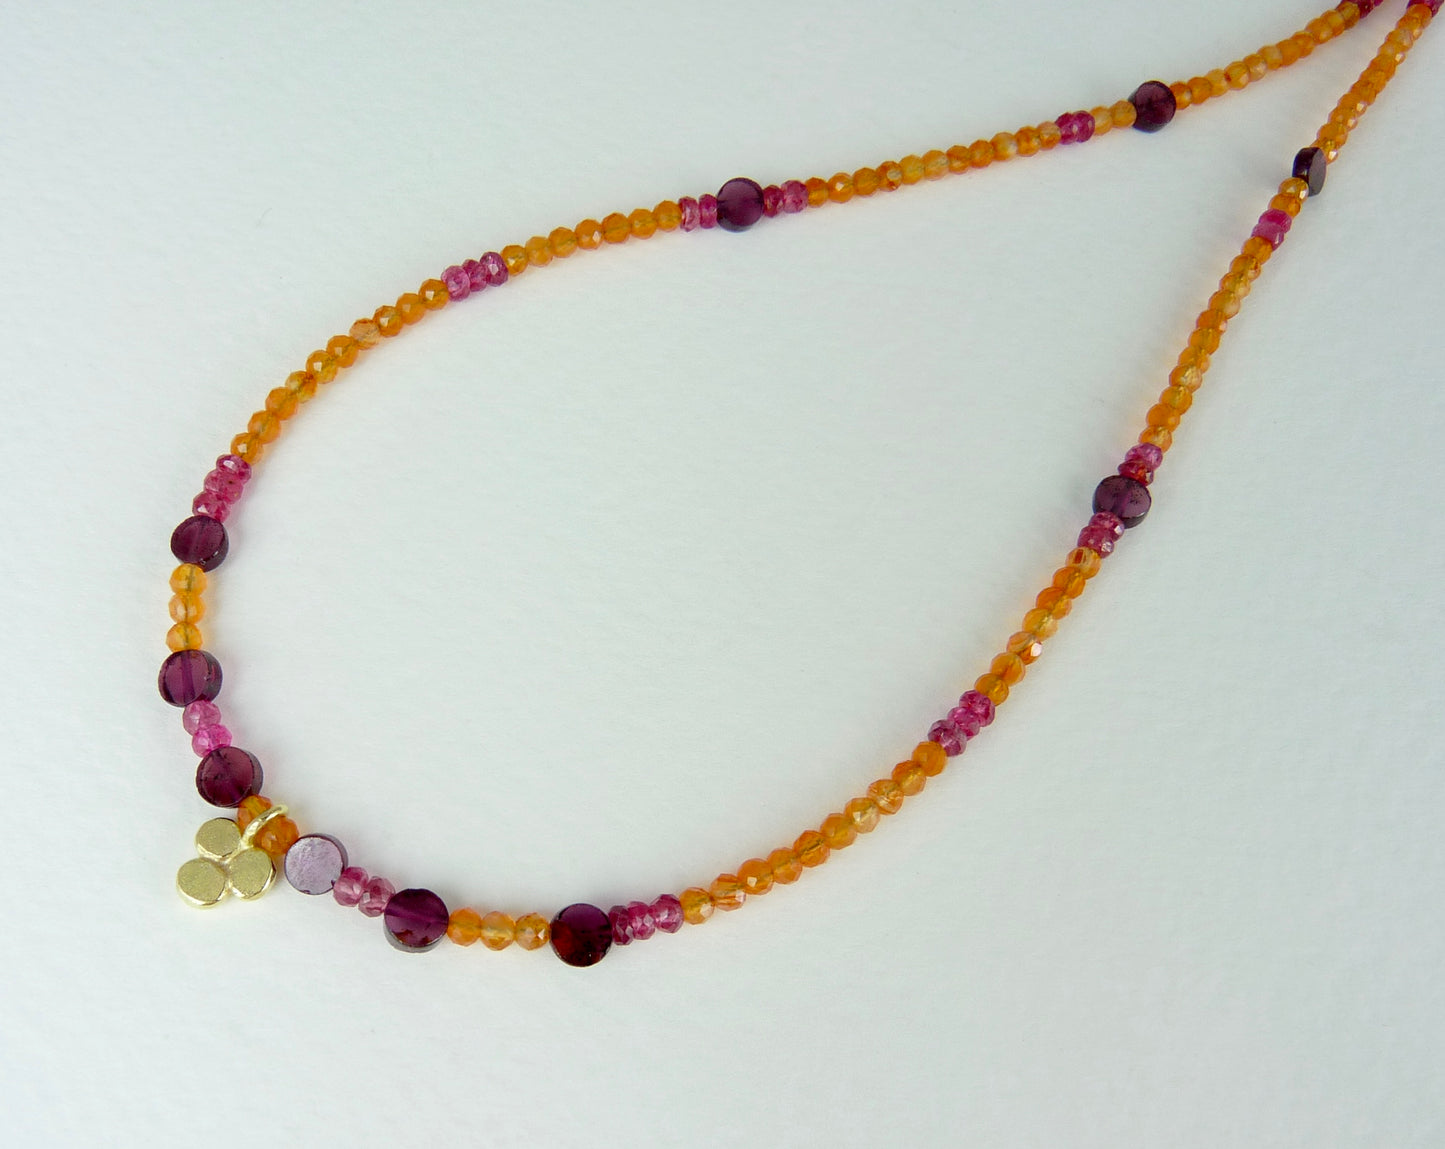 Gemstone Necklace with 18ct Gold Charm